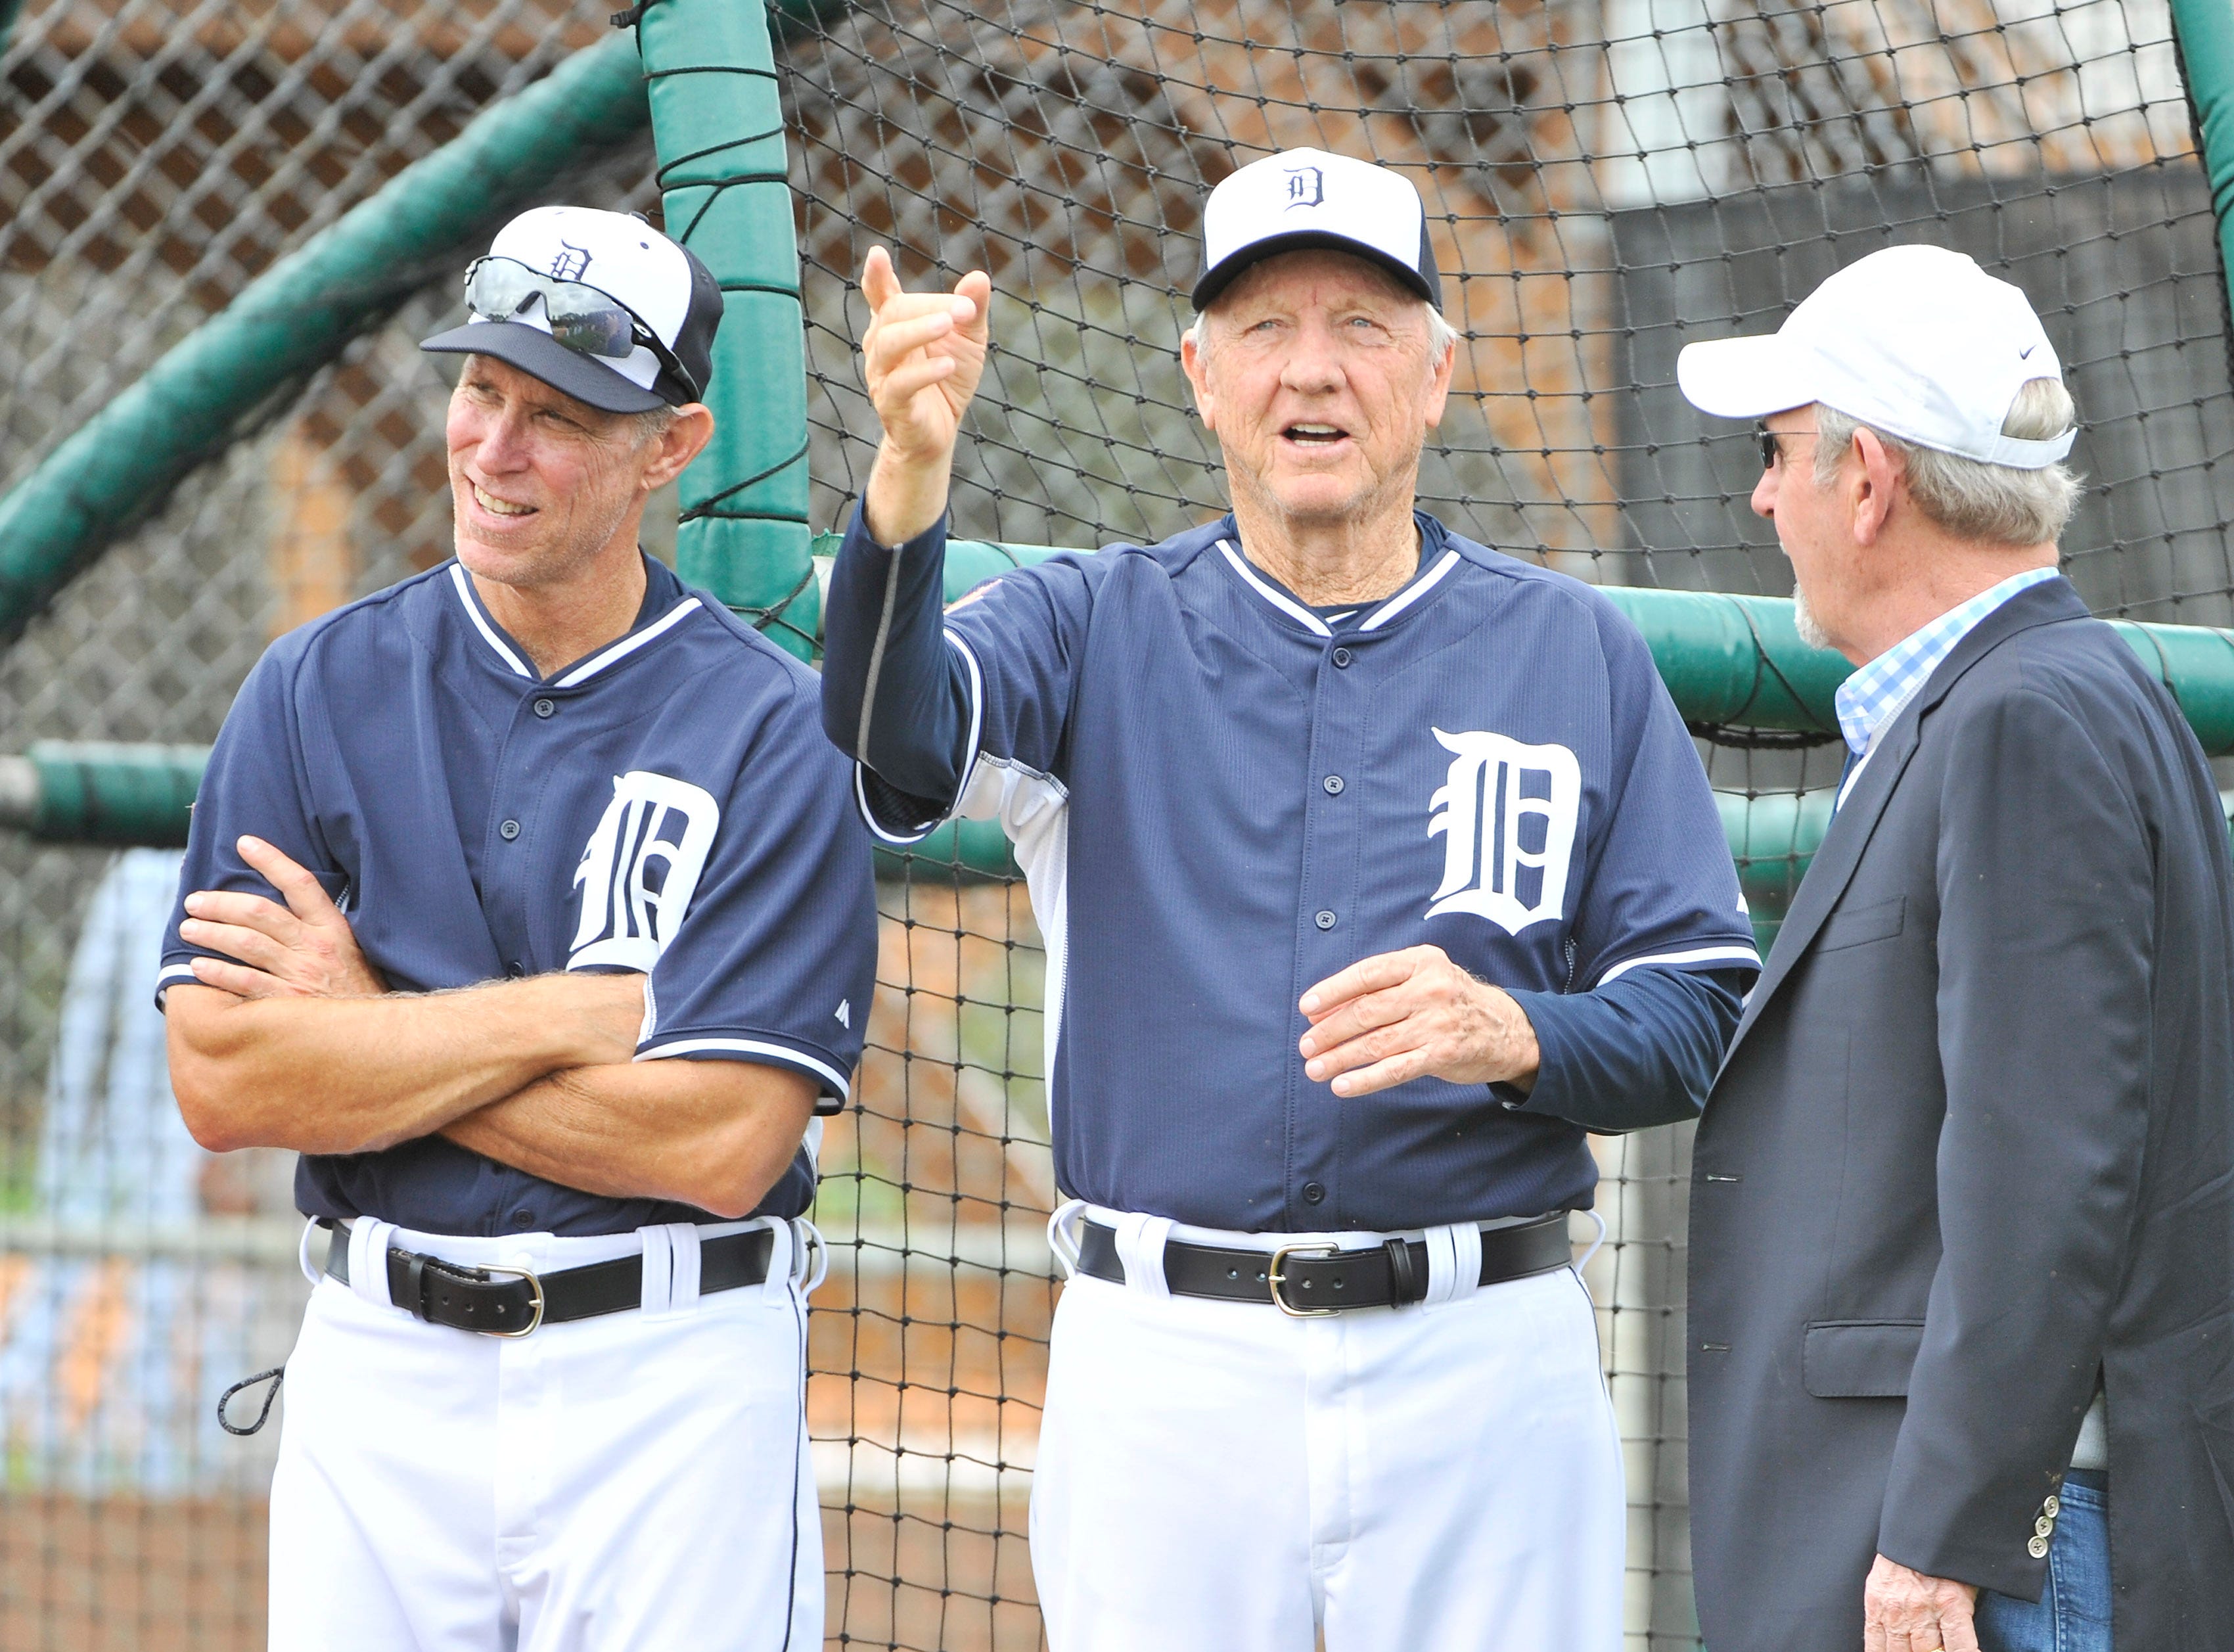 Former Tigers manager Jim Leyland, right, talks with Al Kaline, center, and Alan Trammell at Tigers spring training workout at Joker Marchant practice fields in Lakeland, Fla. on Mar. 1, 2015.